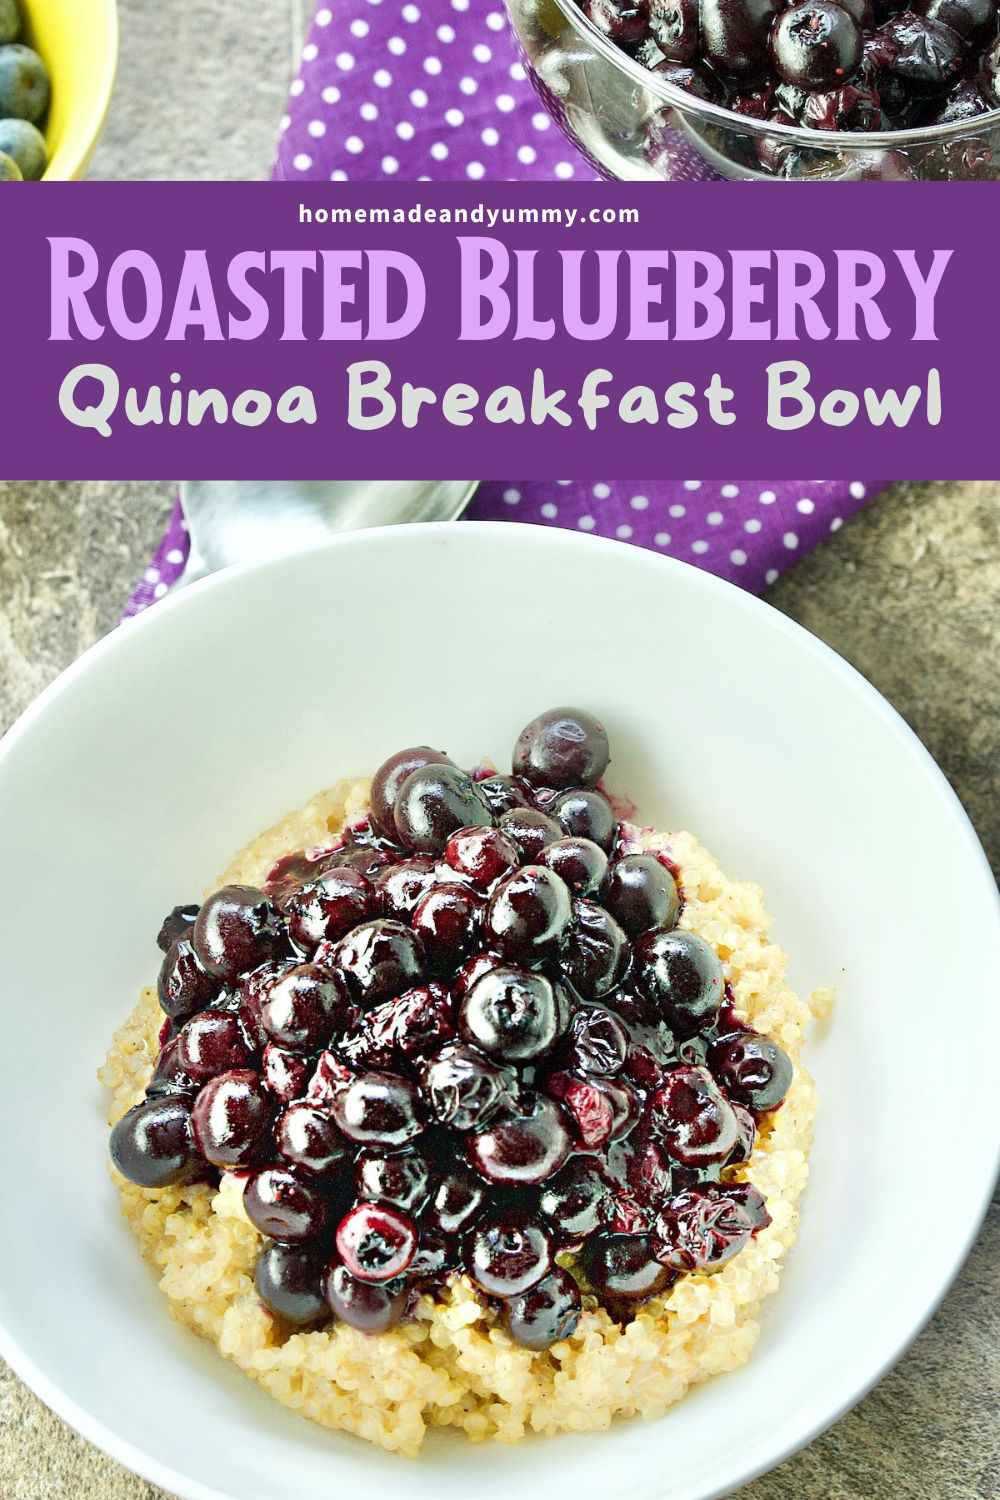 Breakfast quinoa topped with roasted blueberries.